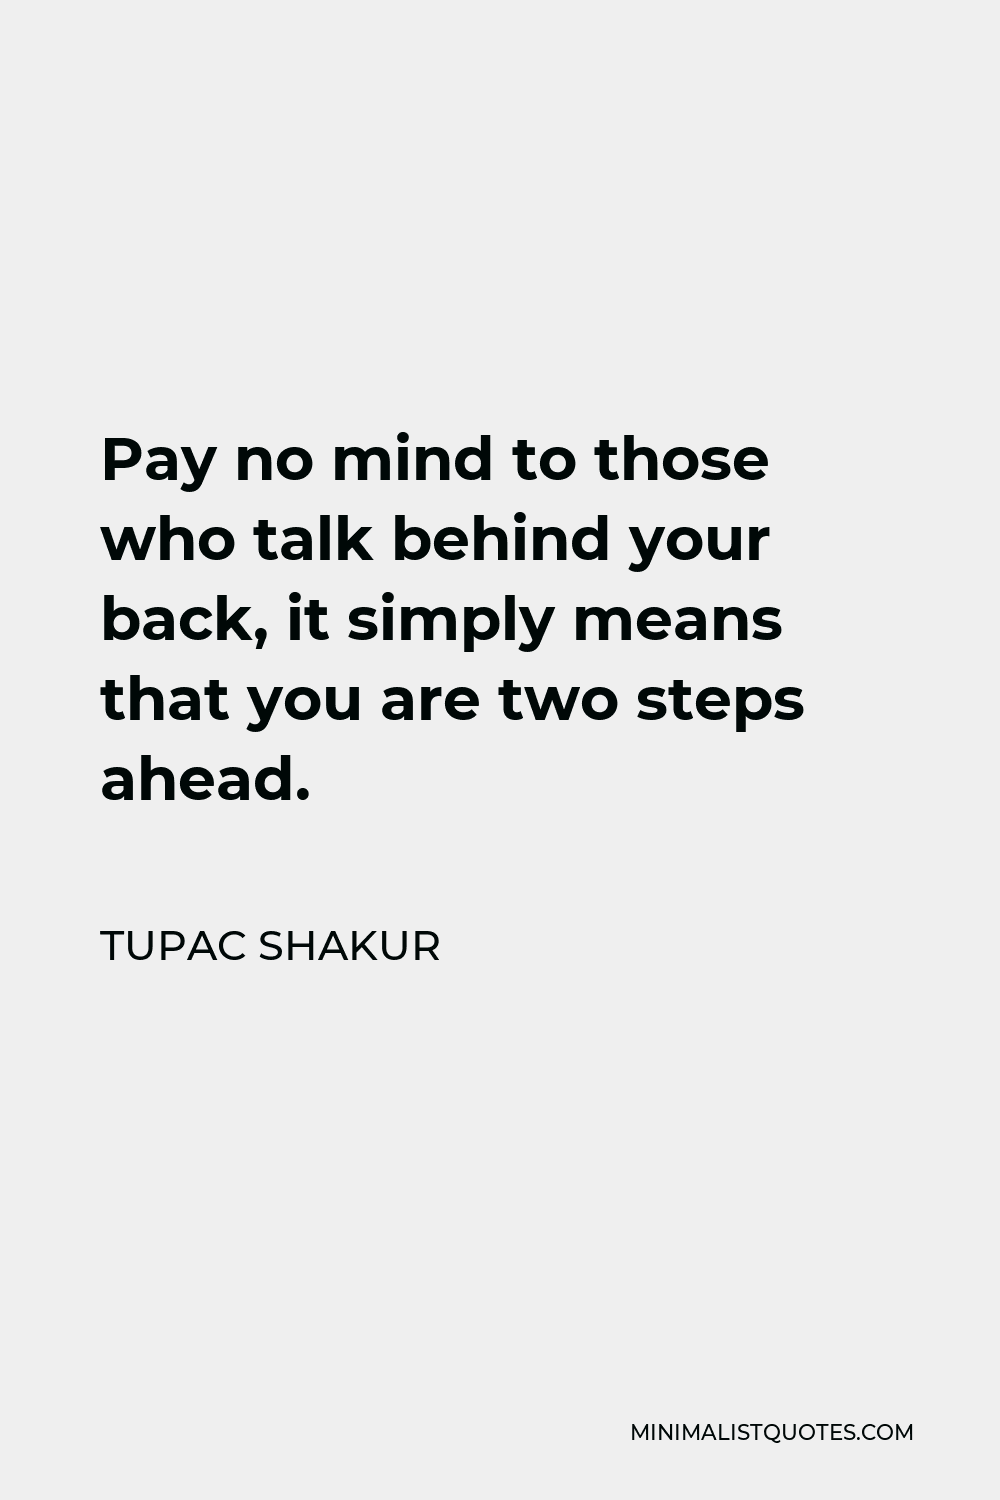 Tupac Shakur Quote - Pay no mind to those who talk behind your back, it simply means that you are two steps ahead.